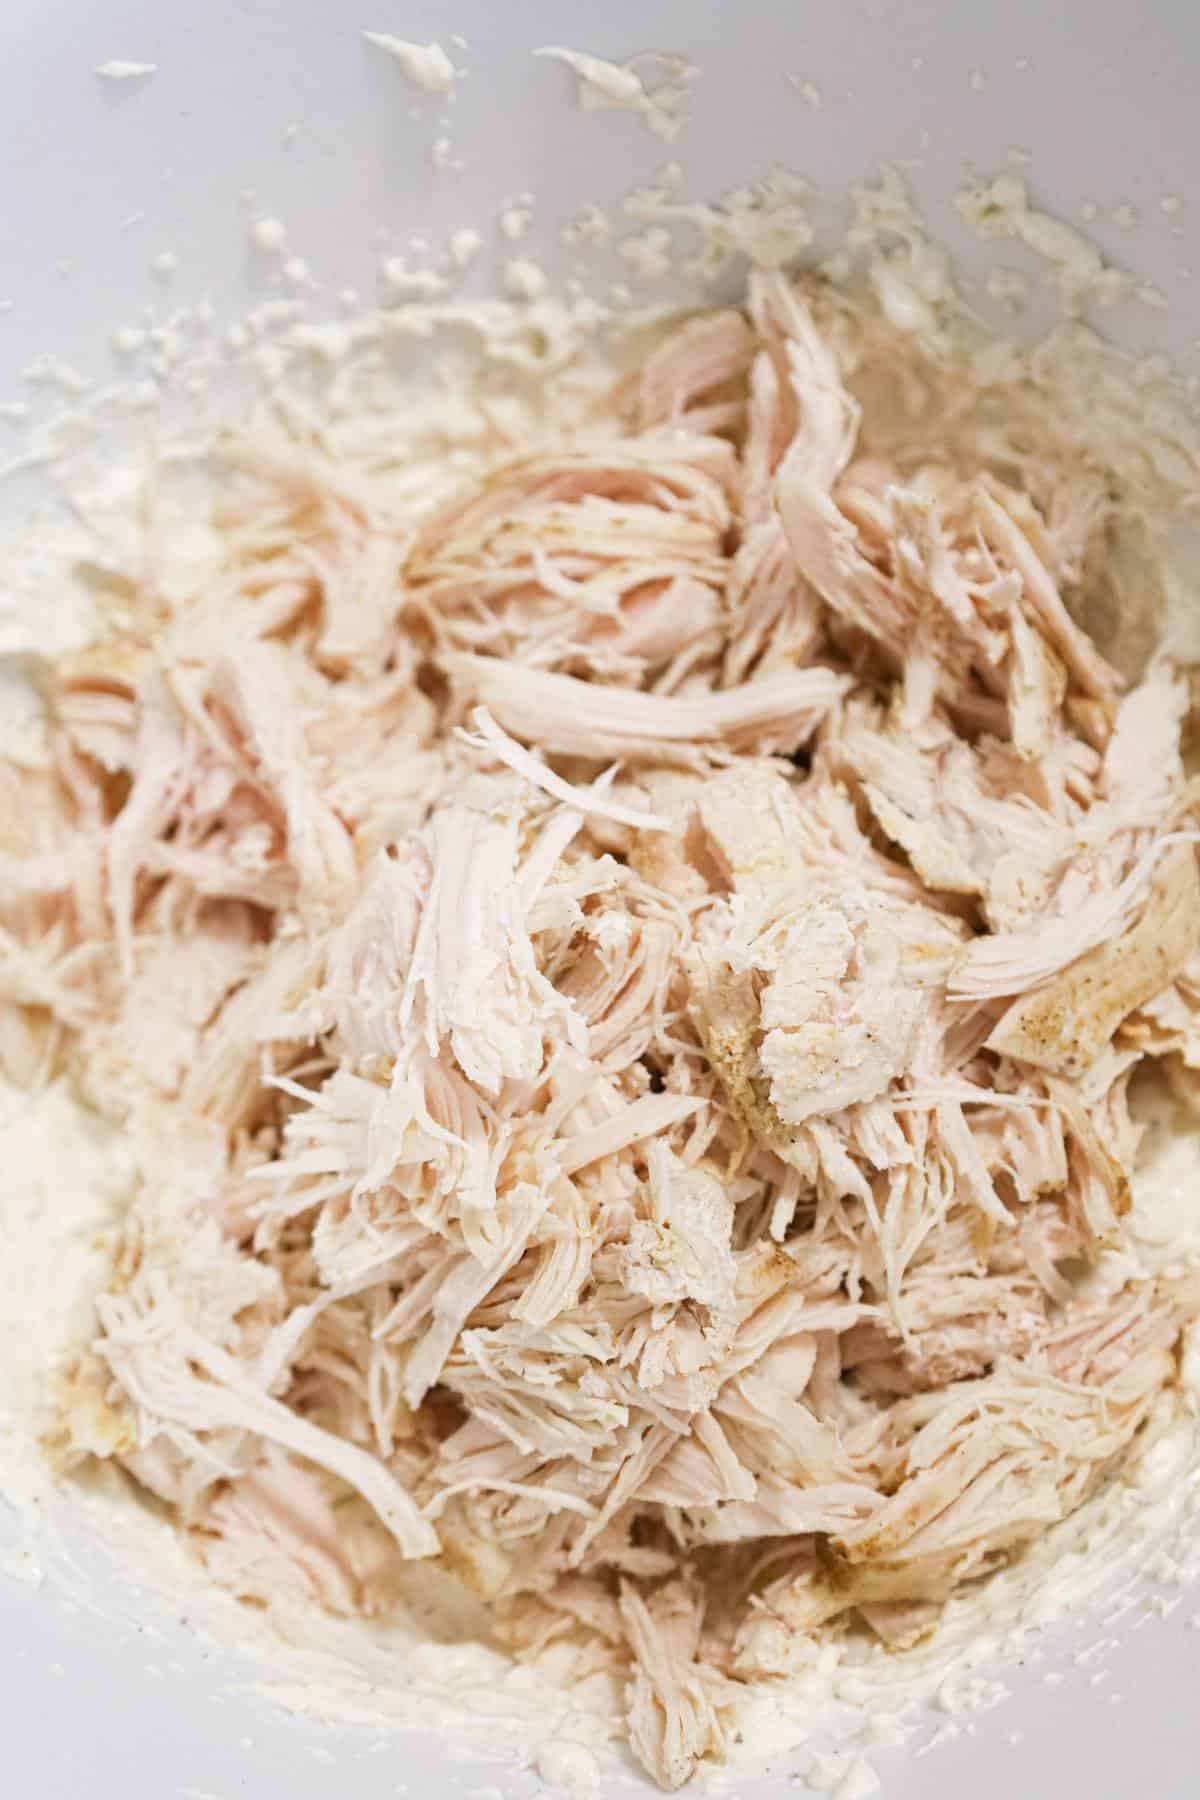 shredded chicken on top of cream cheese and sour cream mixture in a mixing bowl